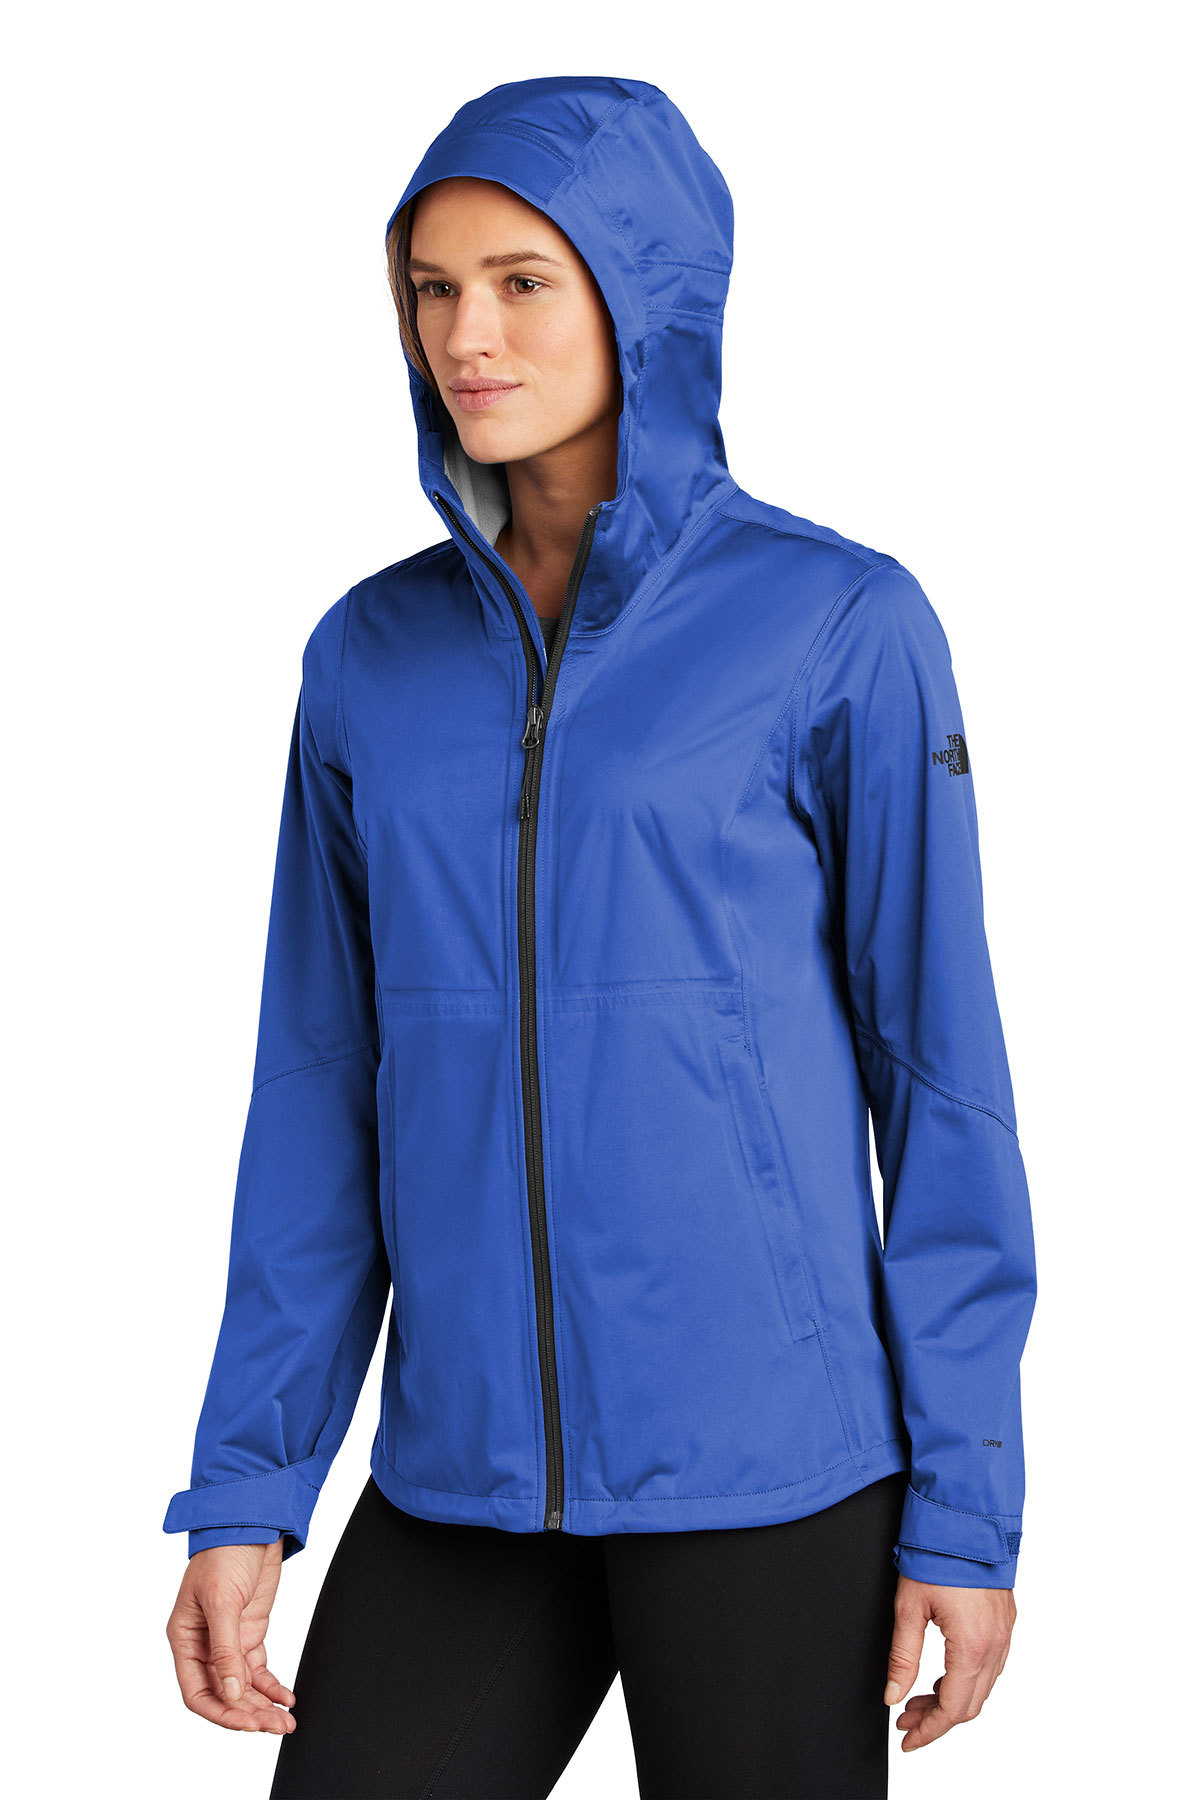 north face women's all weather jacket